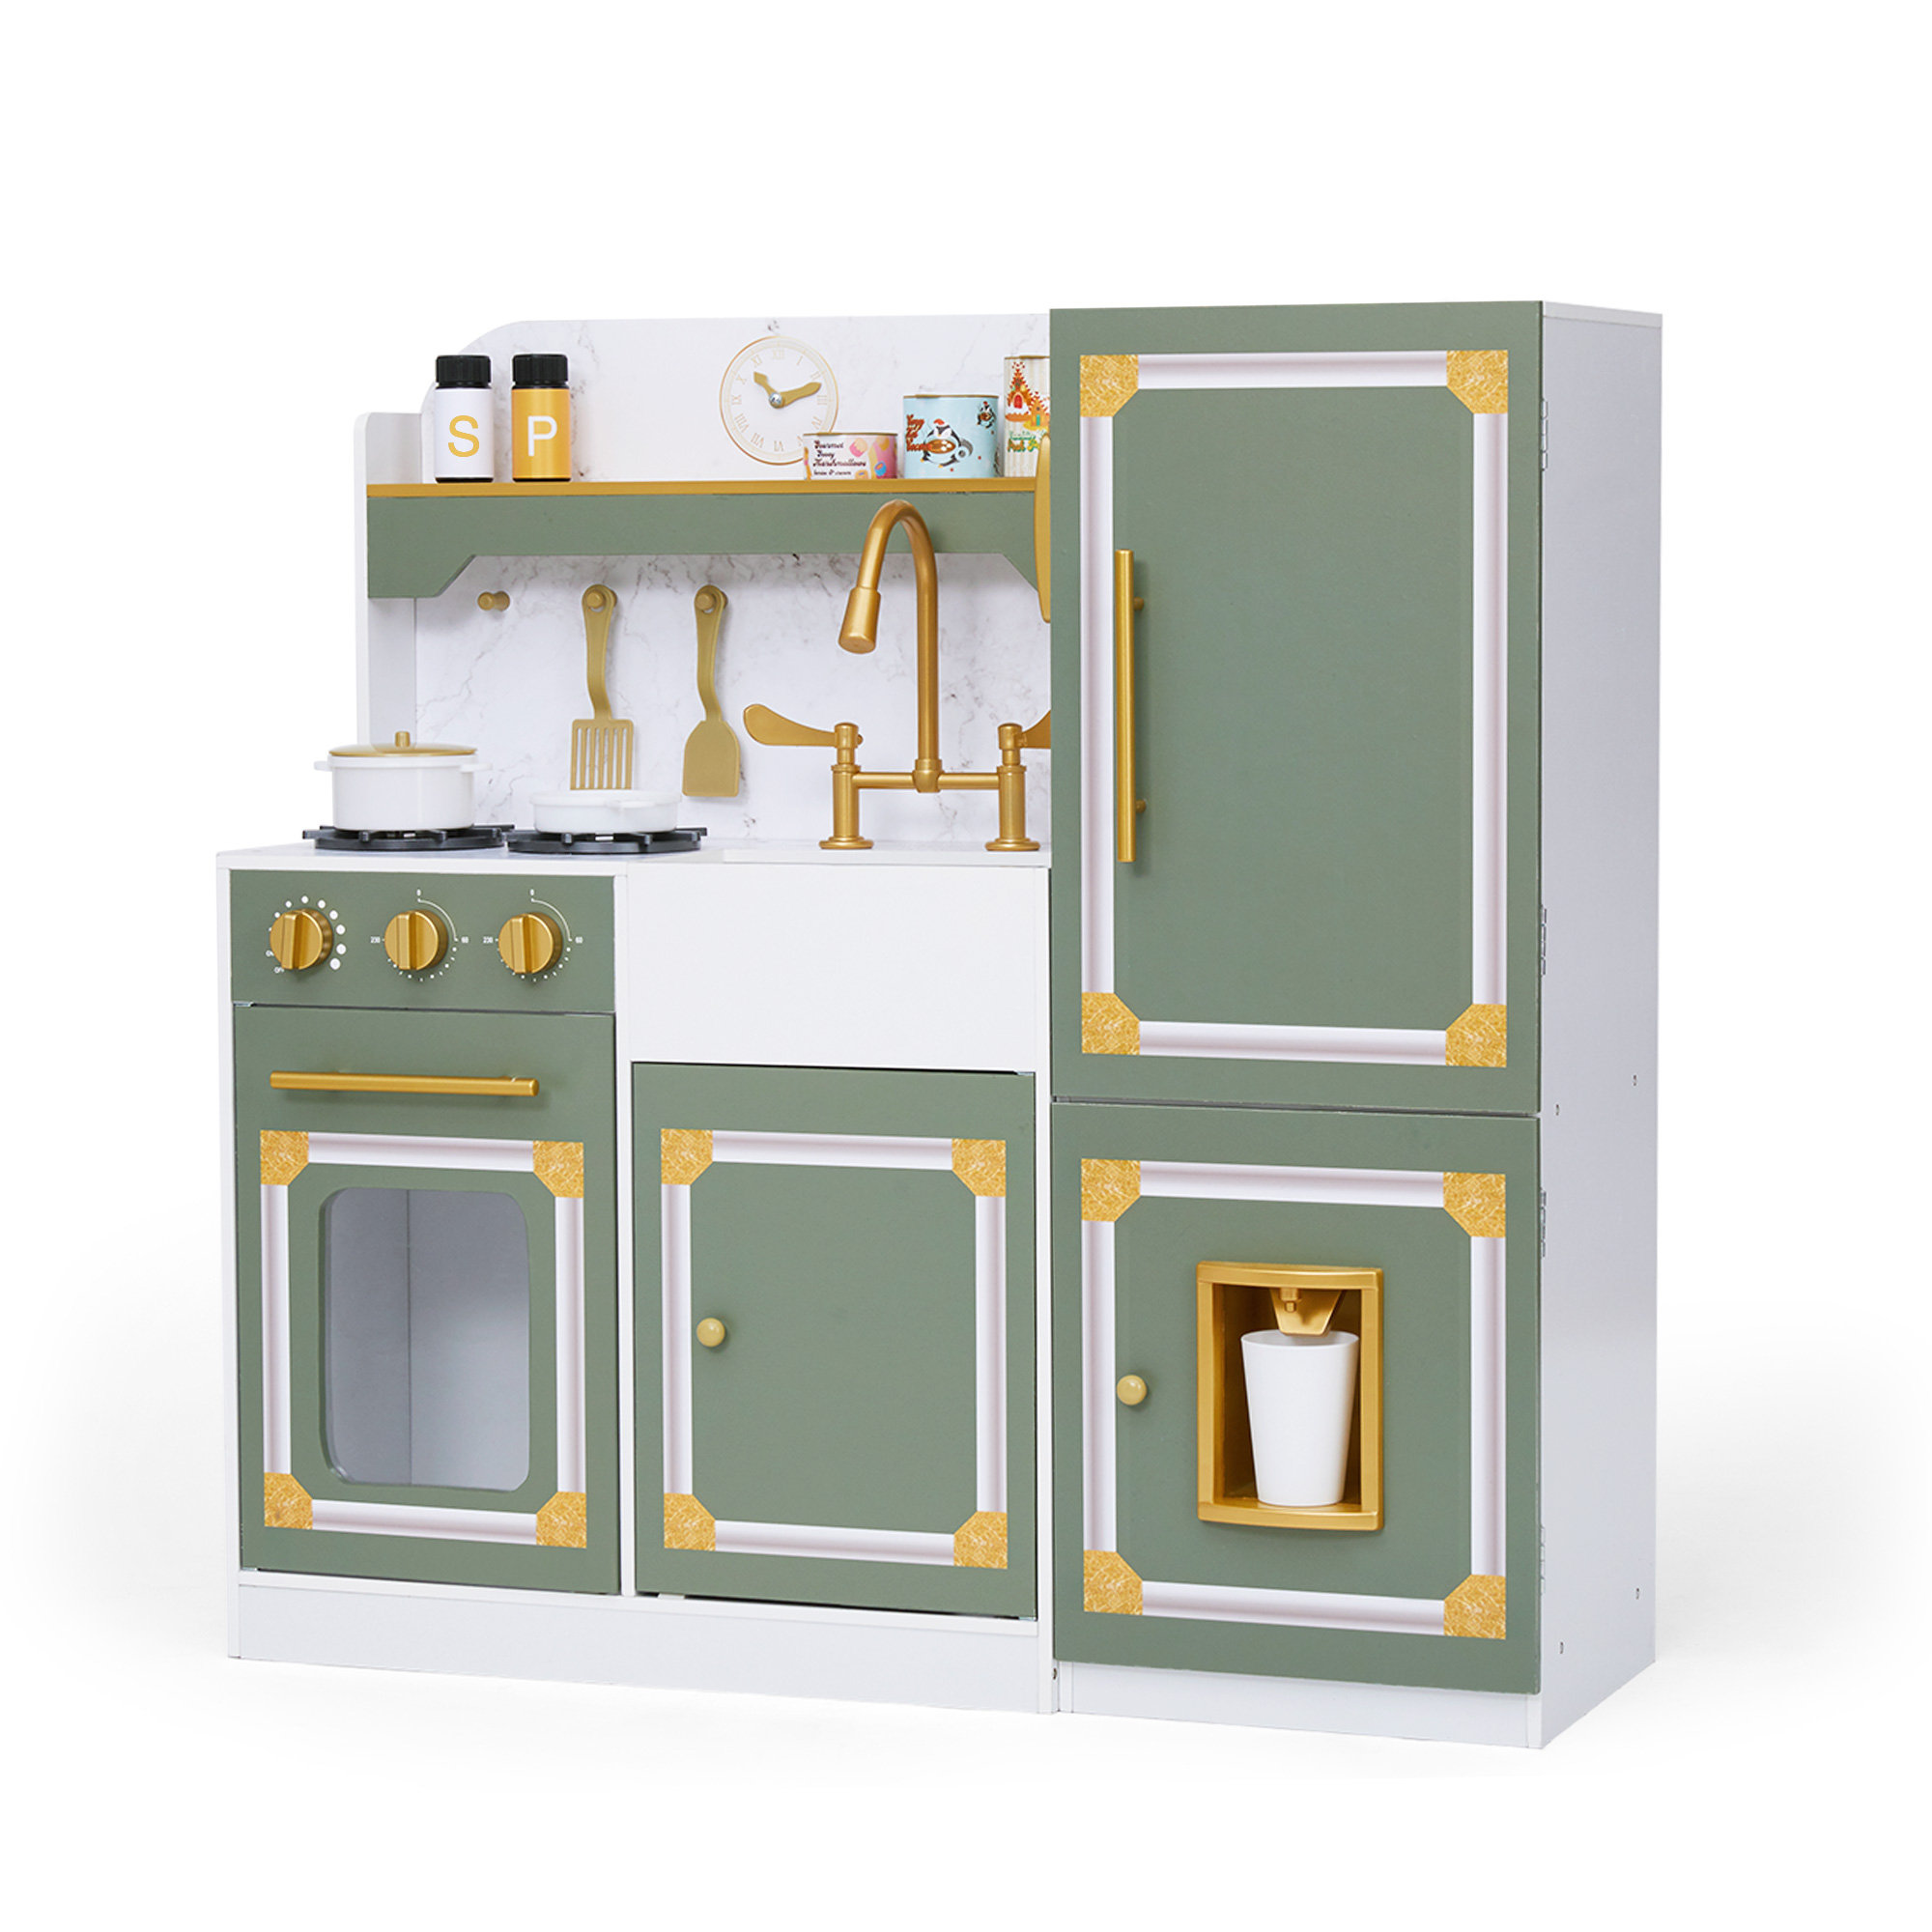 Flash Furniture Children's Wooden Kitchen Set-Stove/Sink/Refrigerator for  Commercial or Home Use